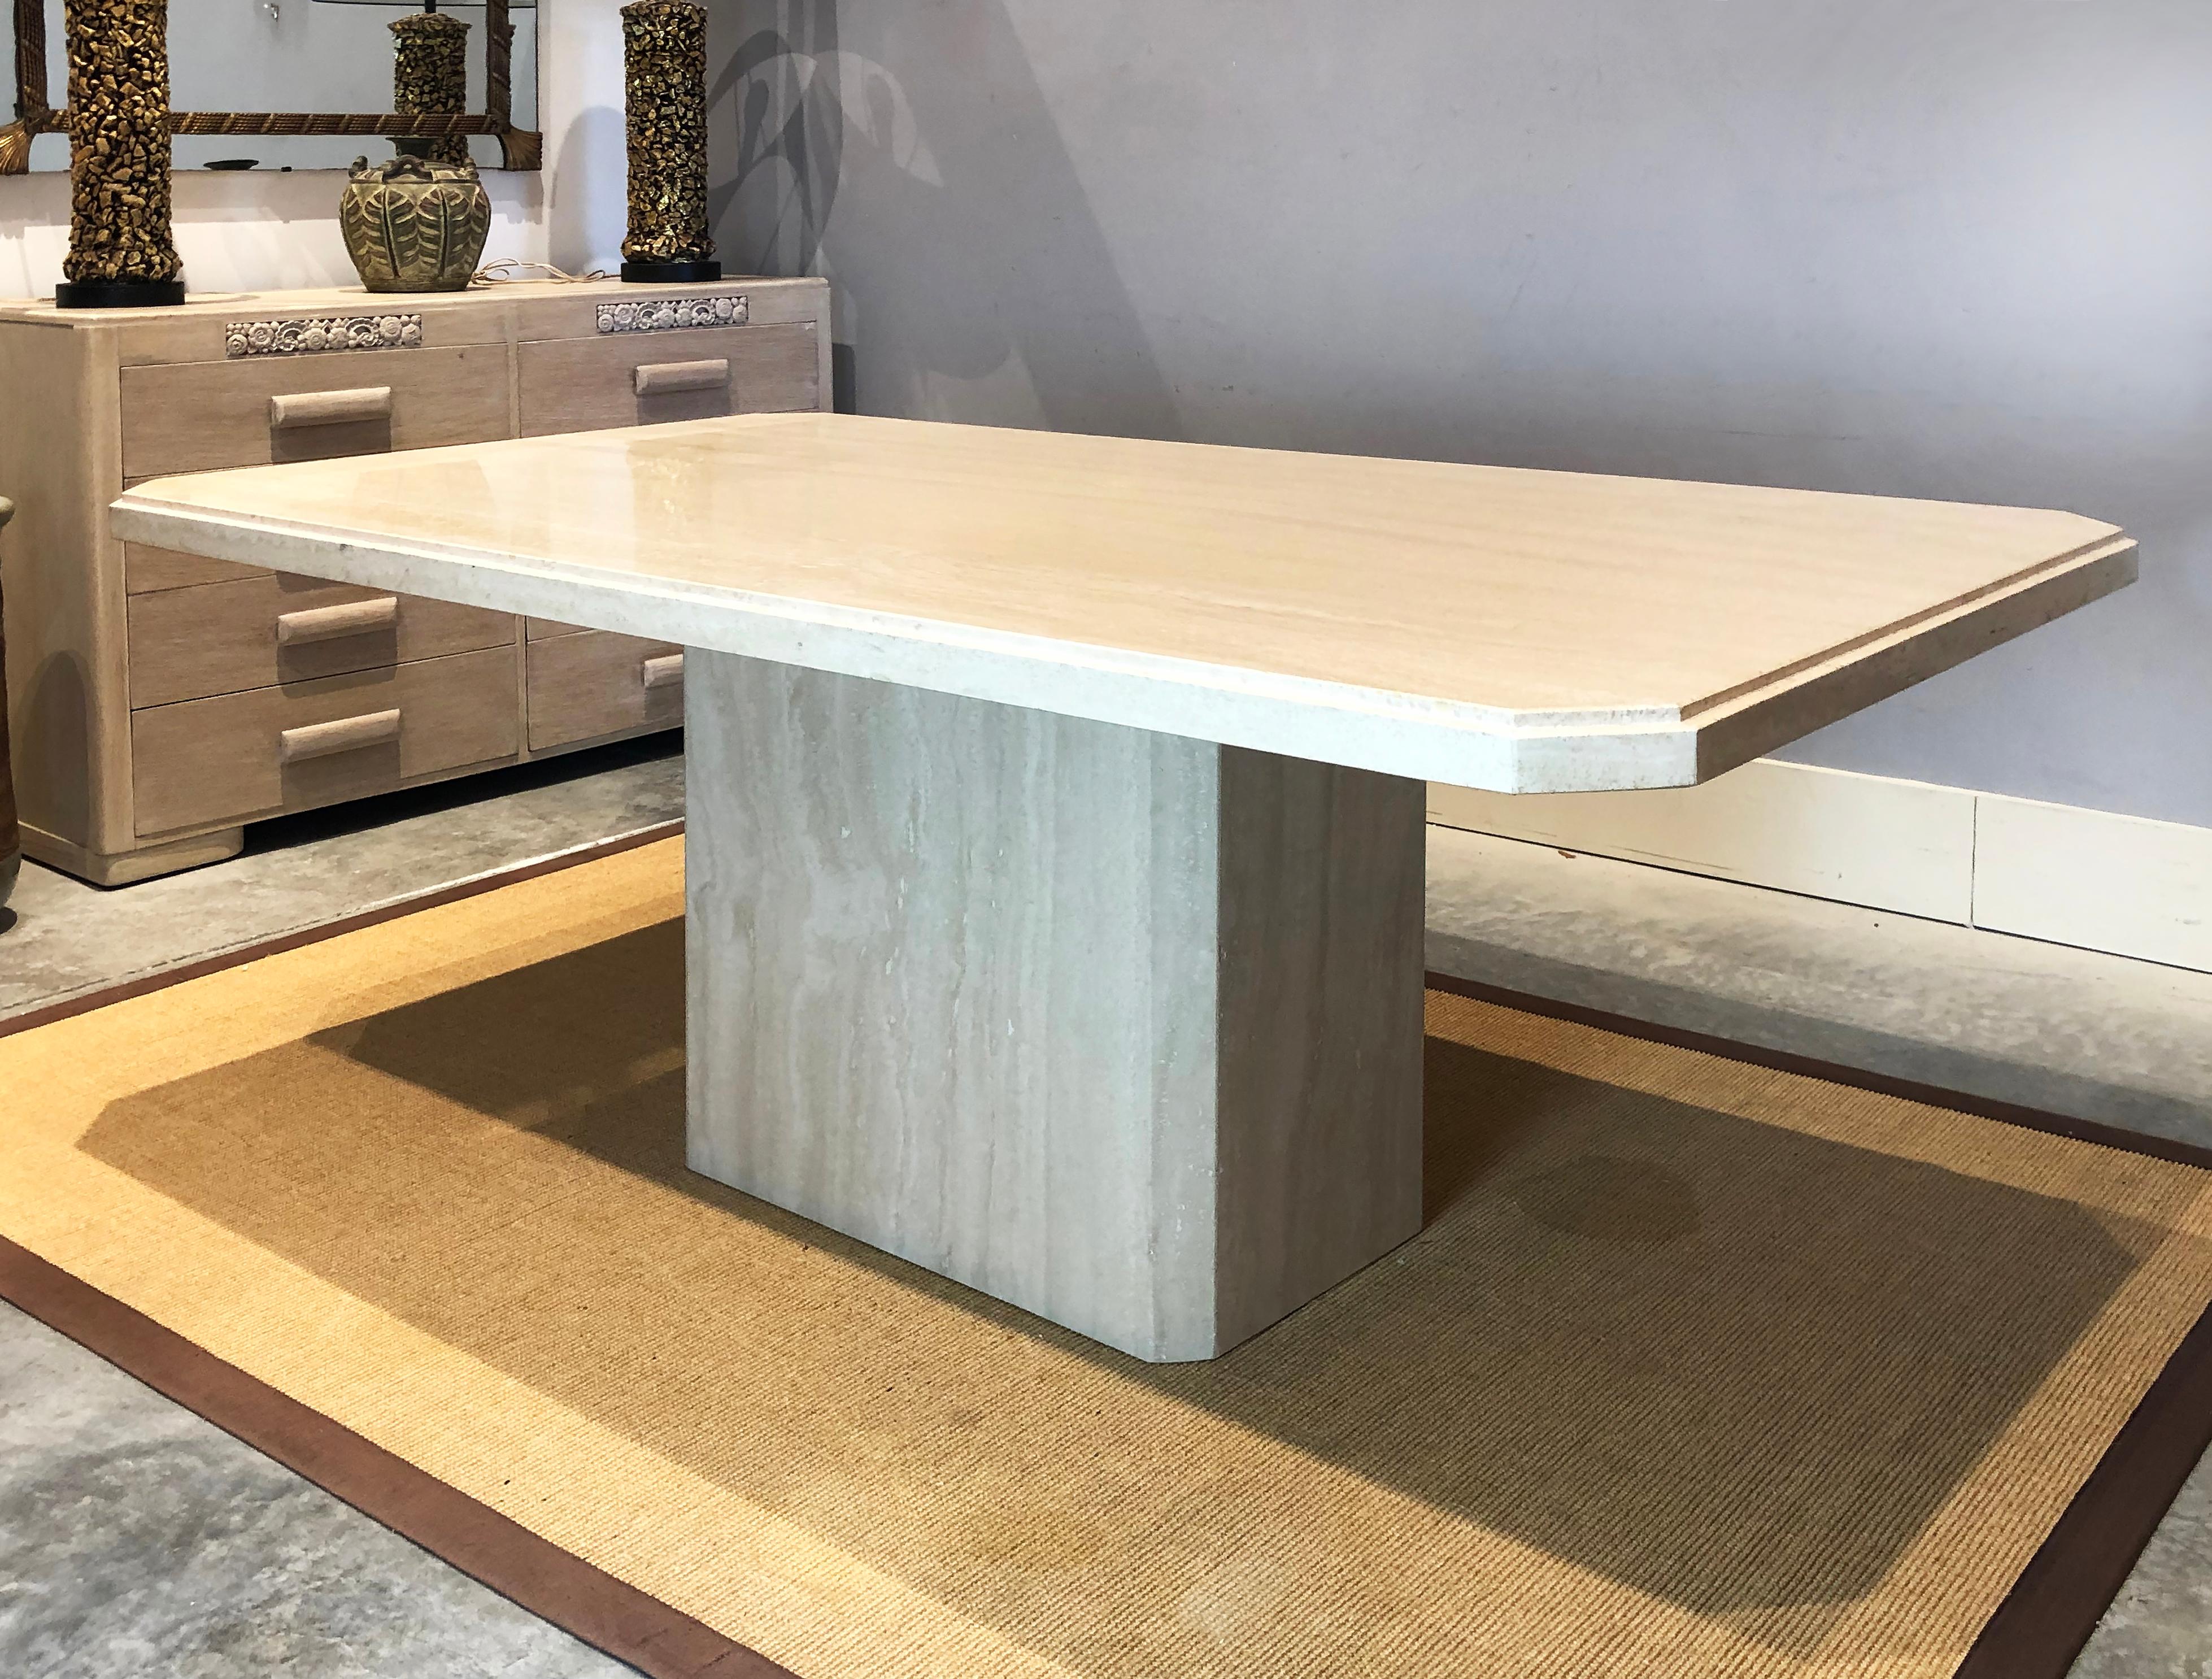 1980s polished travertine pedestal dining table by Ello

Offered for sale is a 1980s polished Travertine Dining Table made in Italy by Ello. This rectangular solid slab table is supported by a large travertine pedestal base. The top has blunted